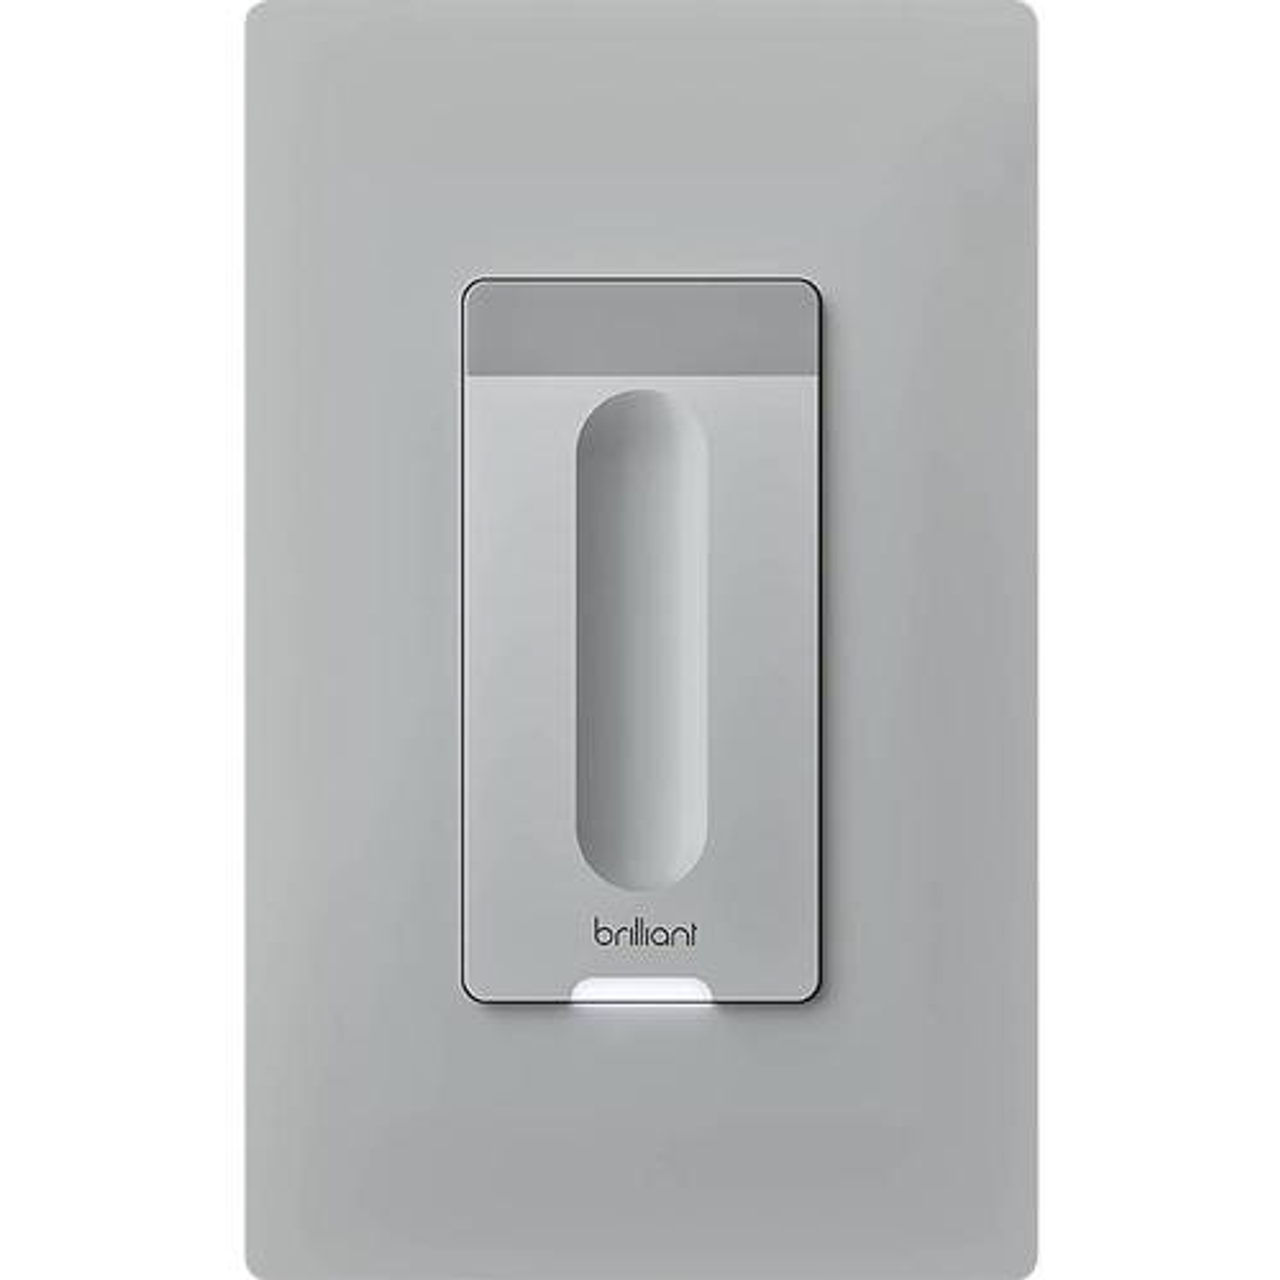 Brilliant Home Technology - Smart Dimmer Switch - Gray